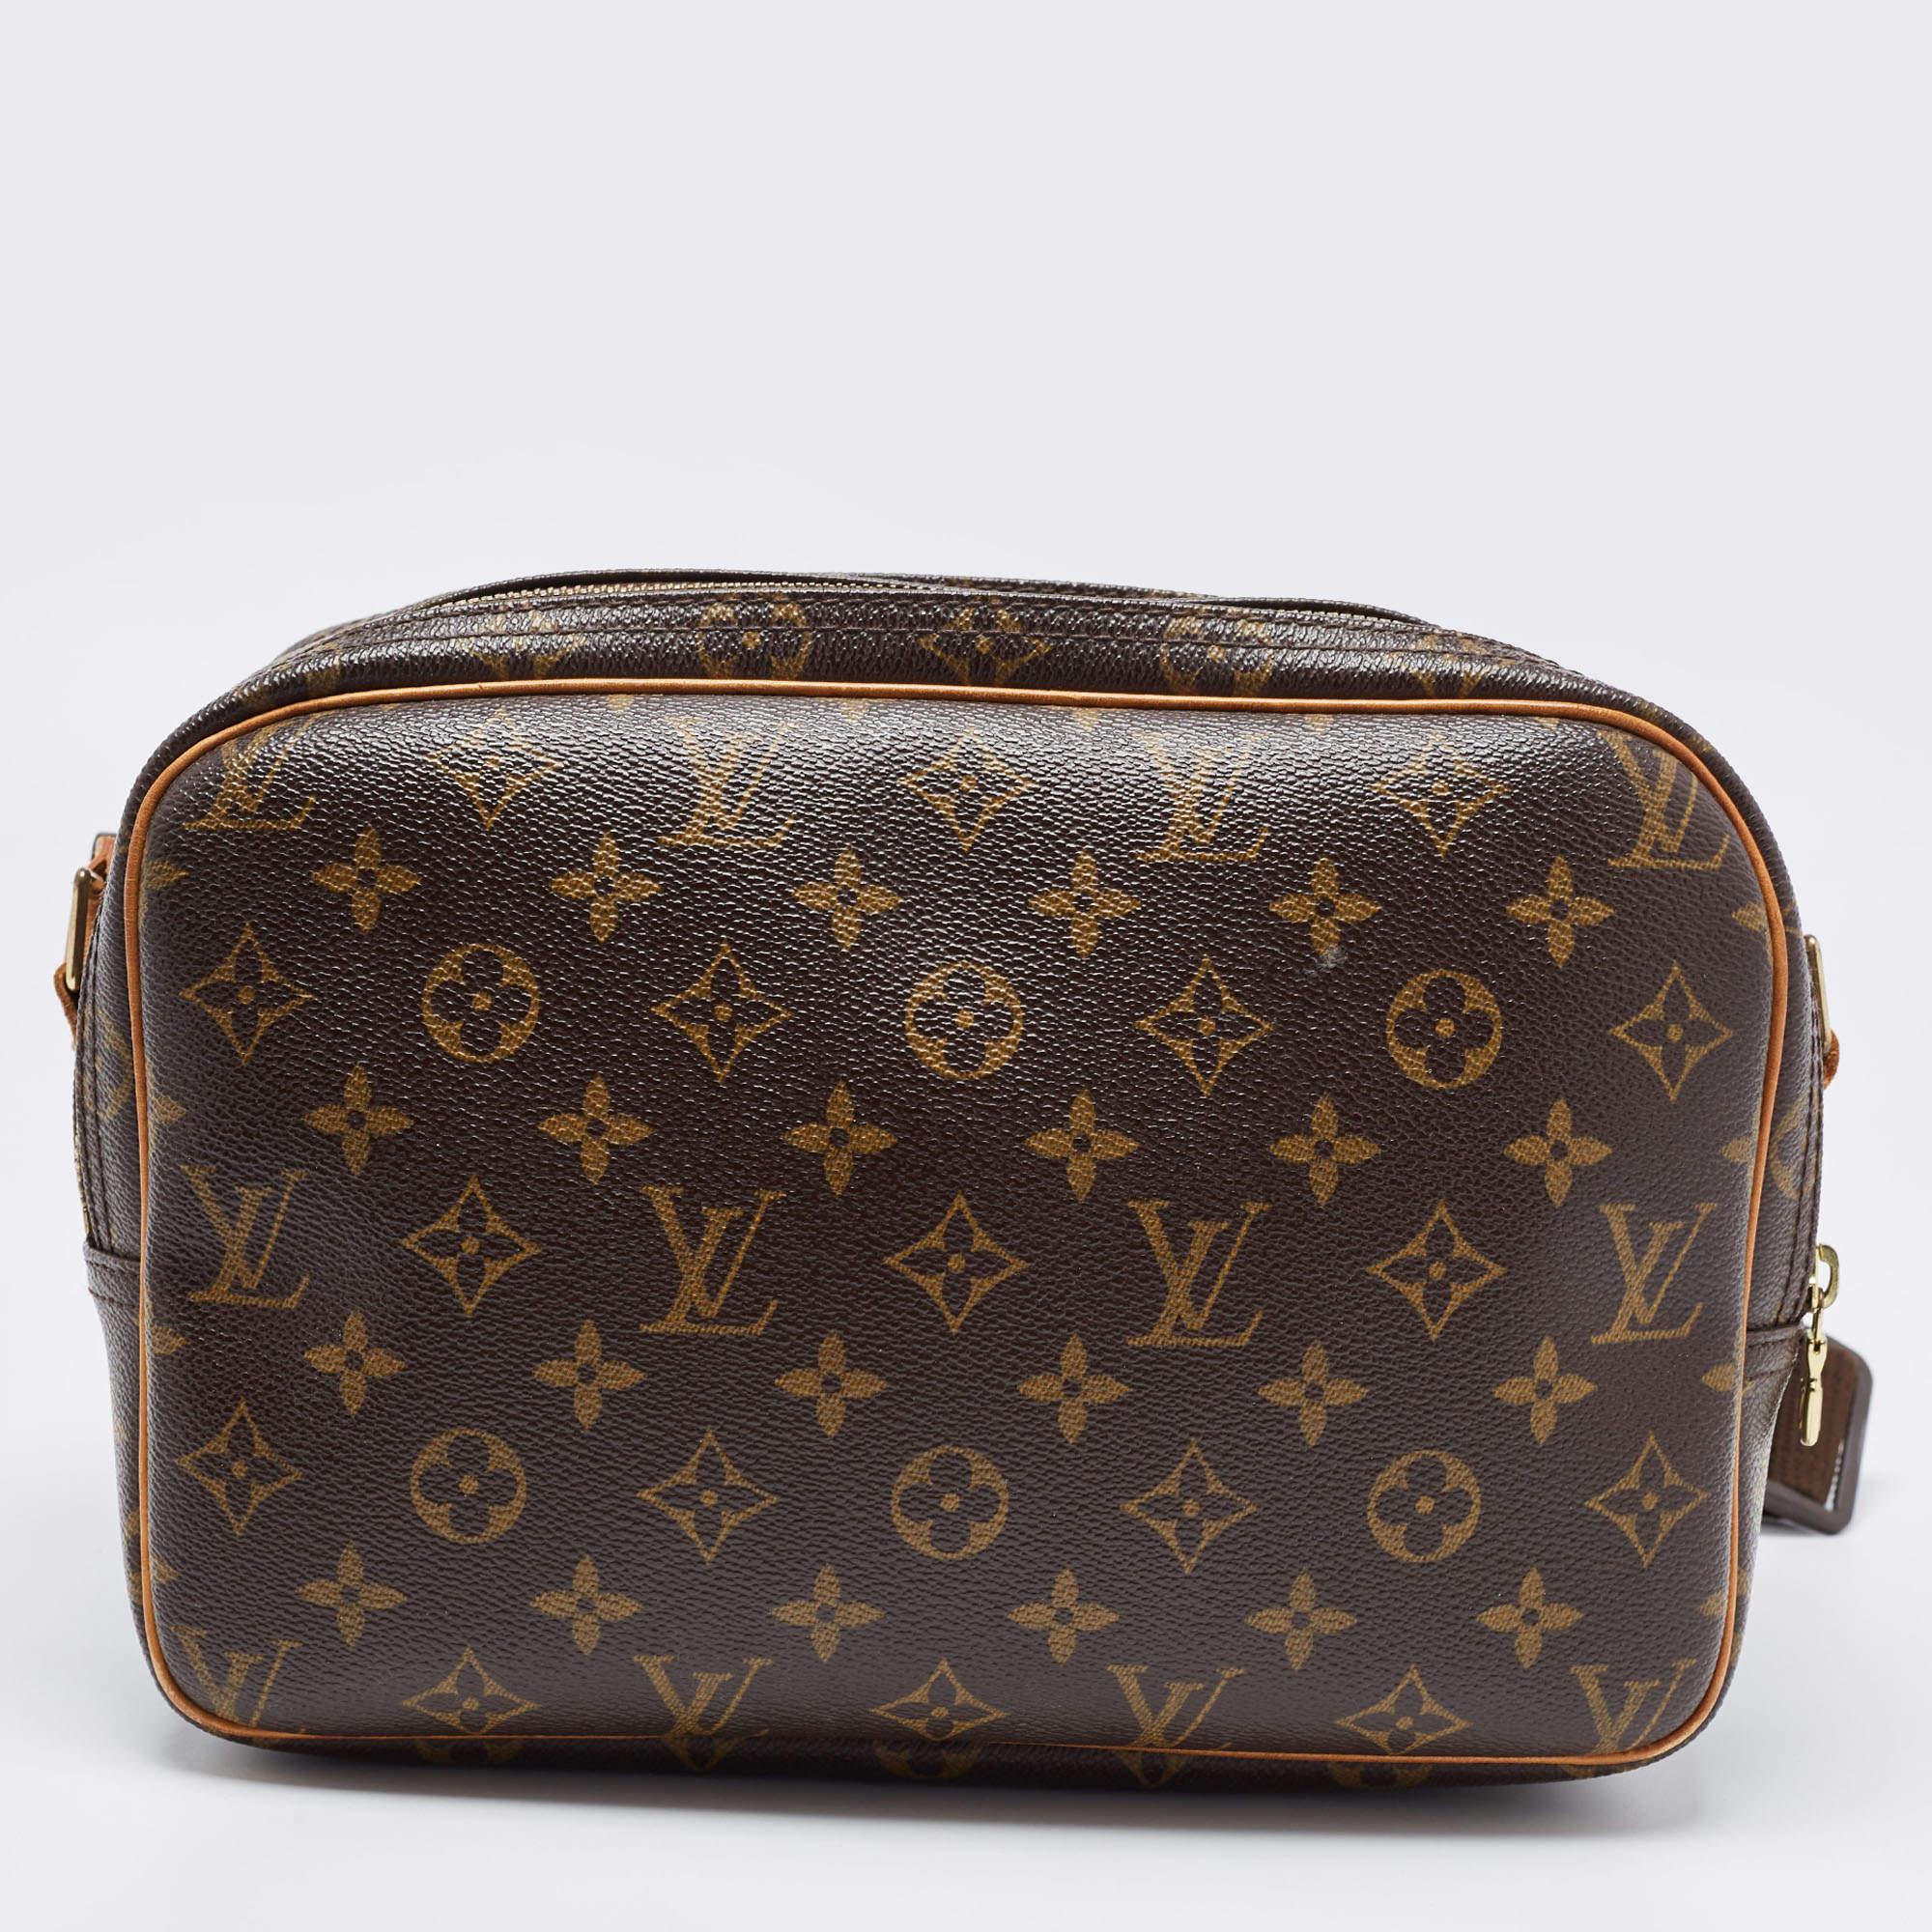 This in-vogue bag by Louis Vuitton will make a classy addition to your outfits. Look stunning with this bag perfect for you. This stylish monogram canvas bag is very stylish with its alluring features.

